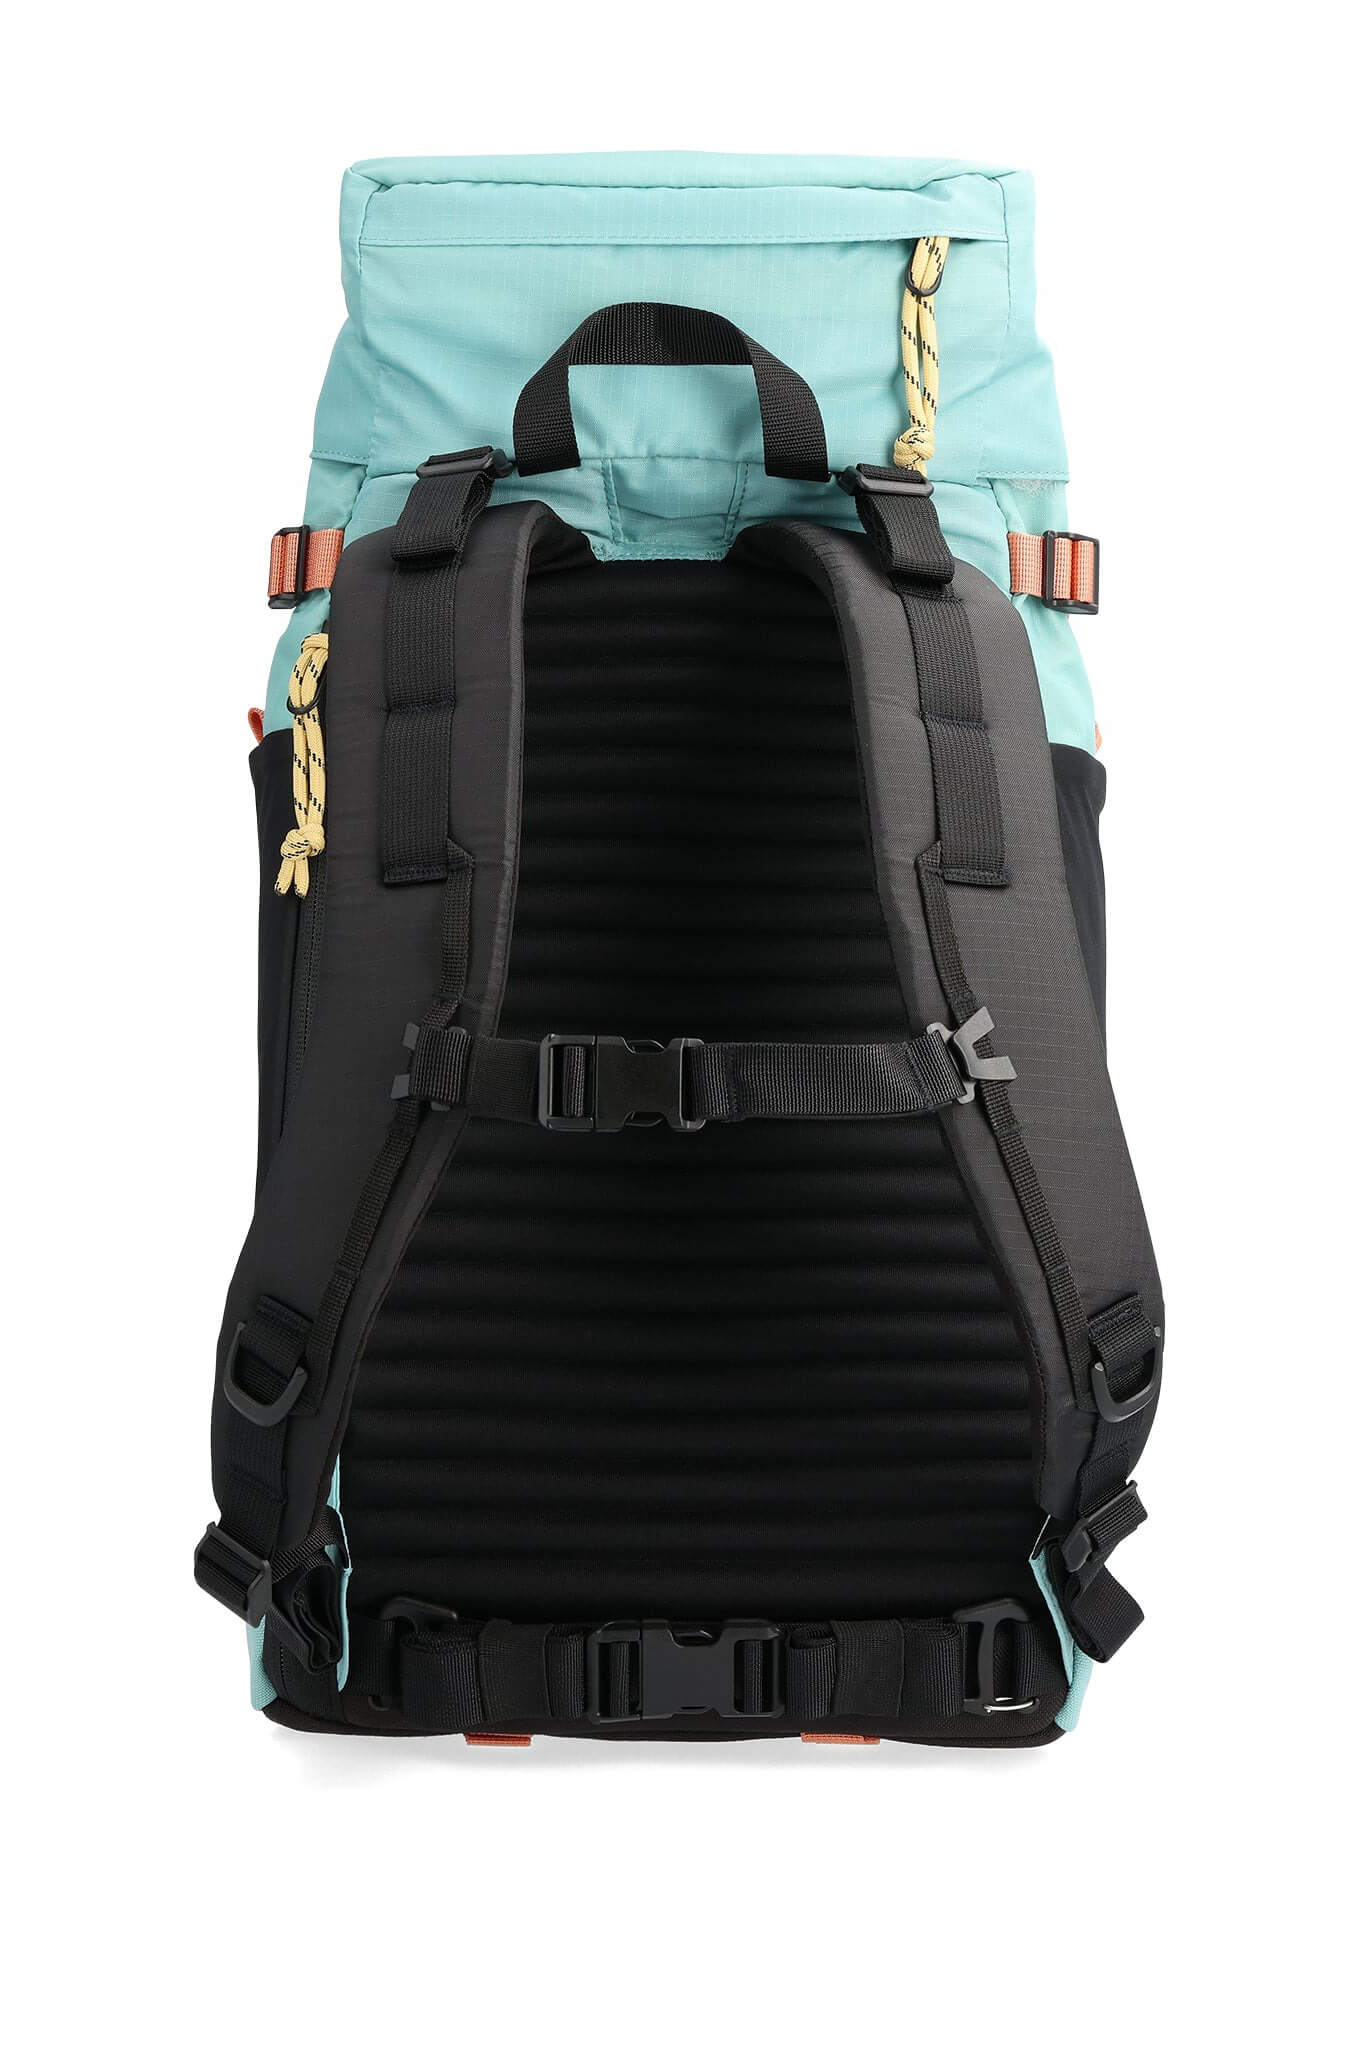 Topo Designs mountain pack 2.0 16L in geode green and sea pine